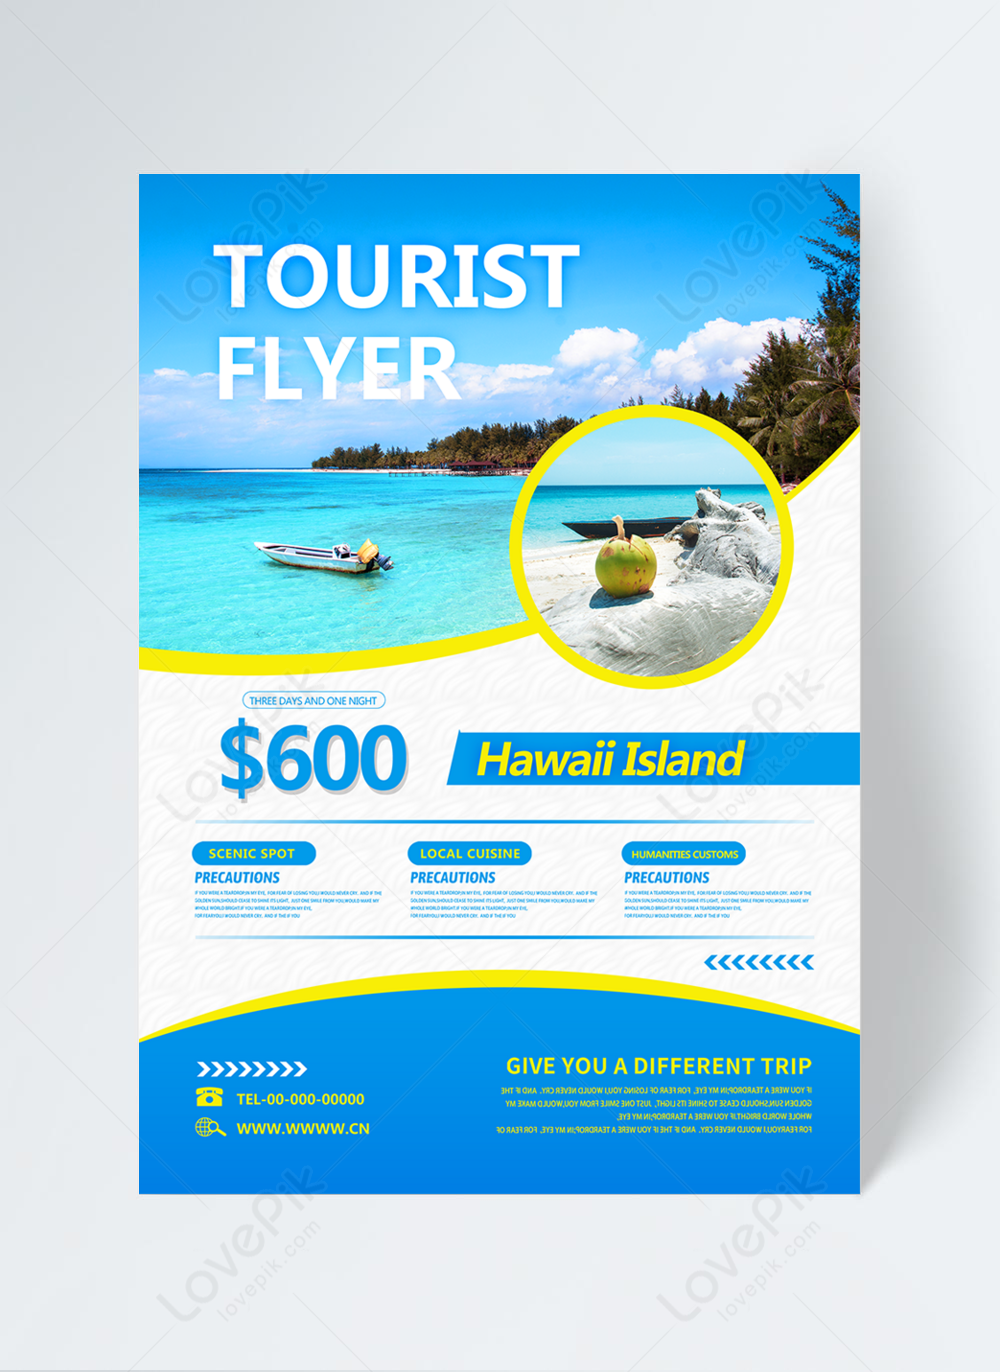 Fashion tourist attraction flyer template image_picture free Pertaining To Island Brochure Template